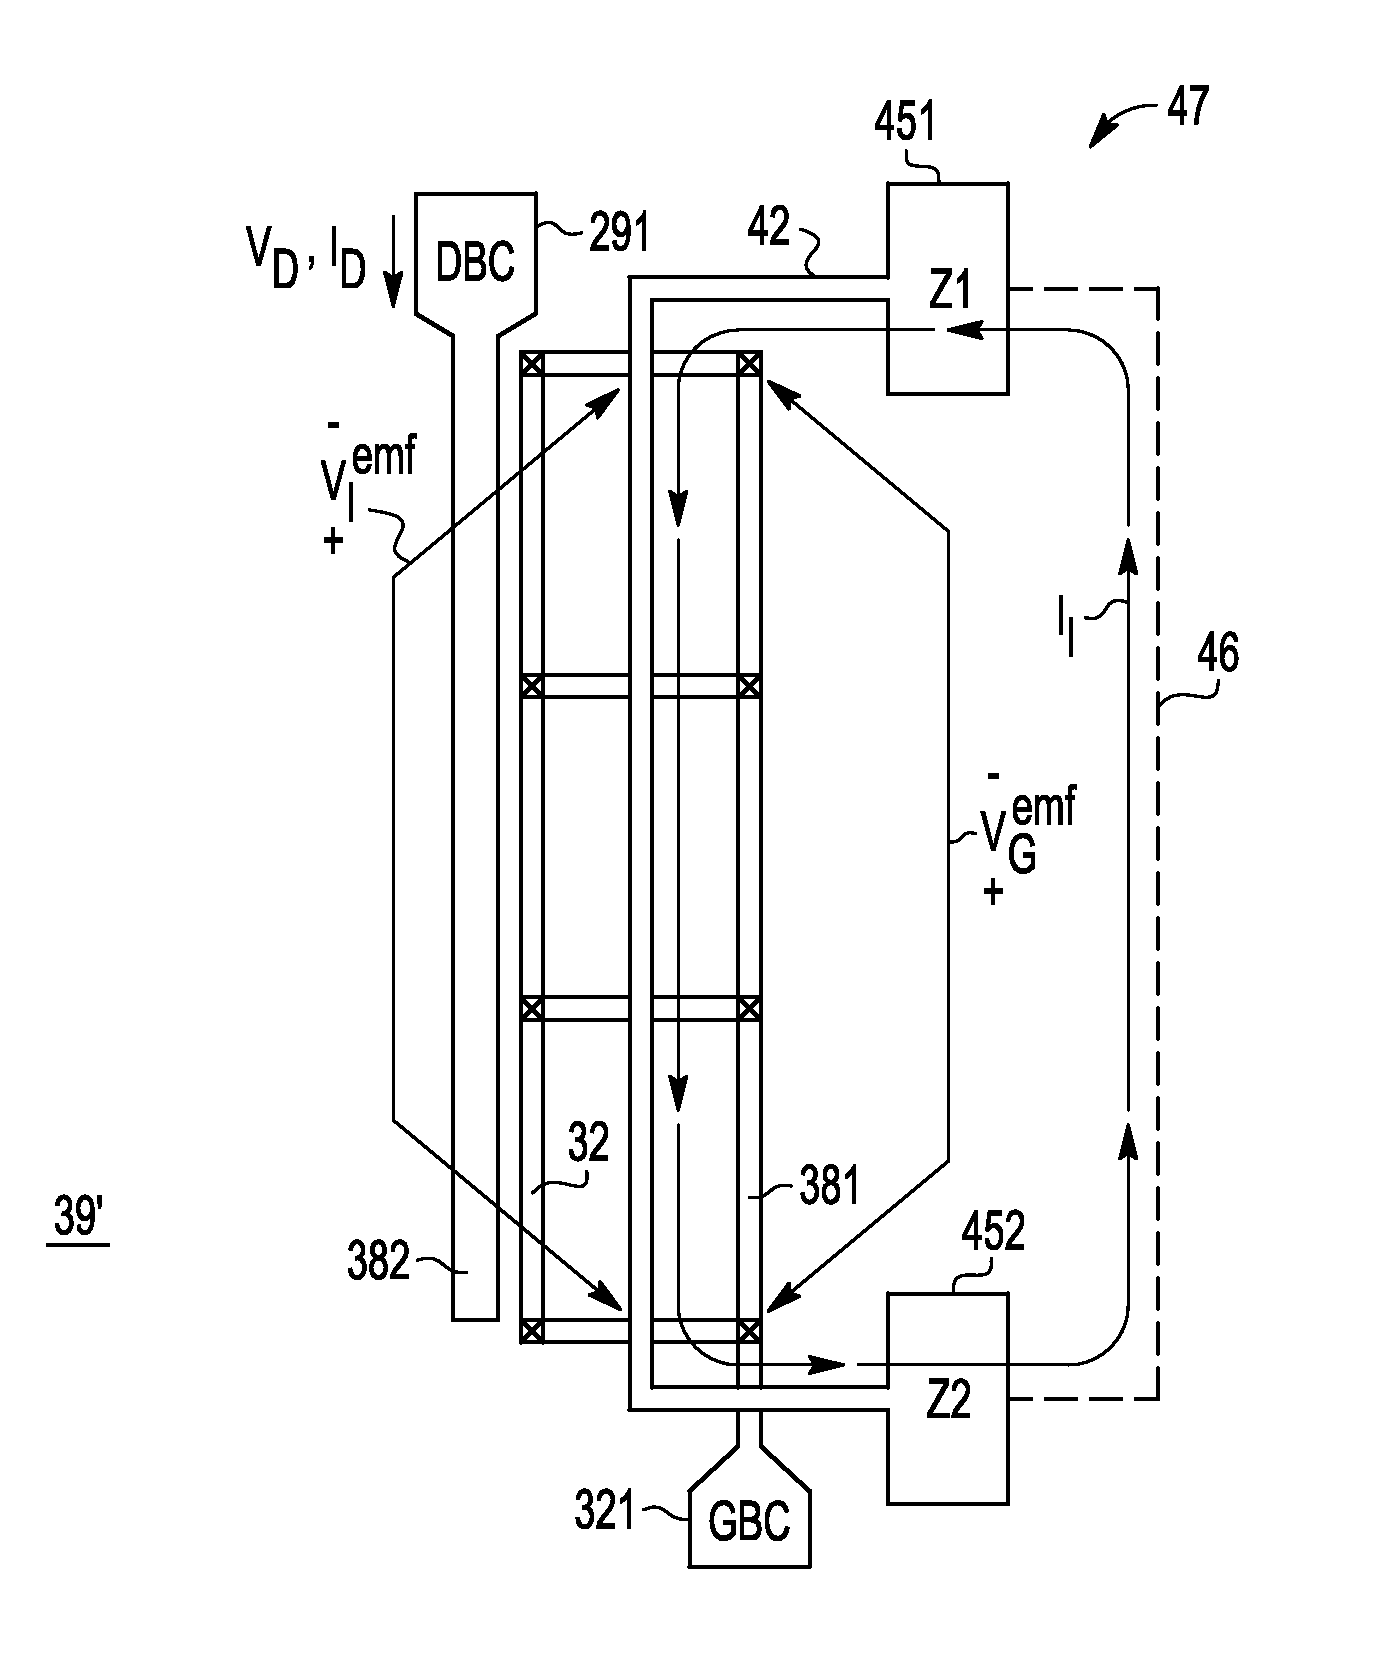 Semiconductor device with feedback control